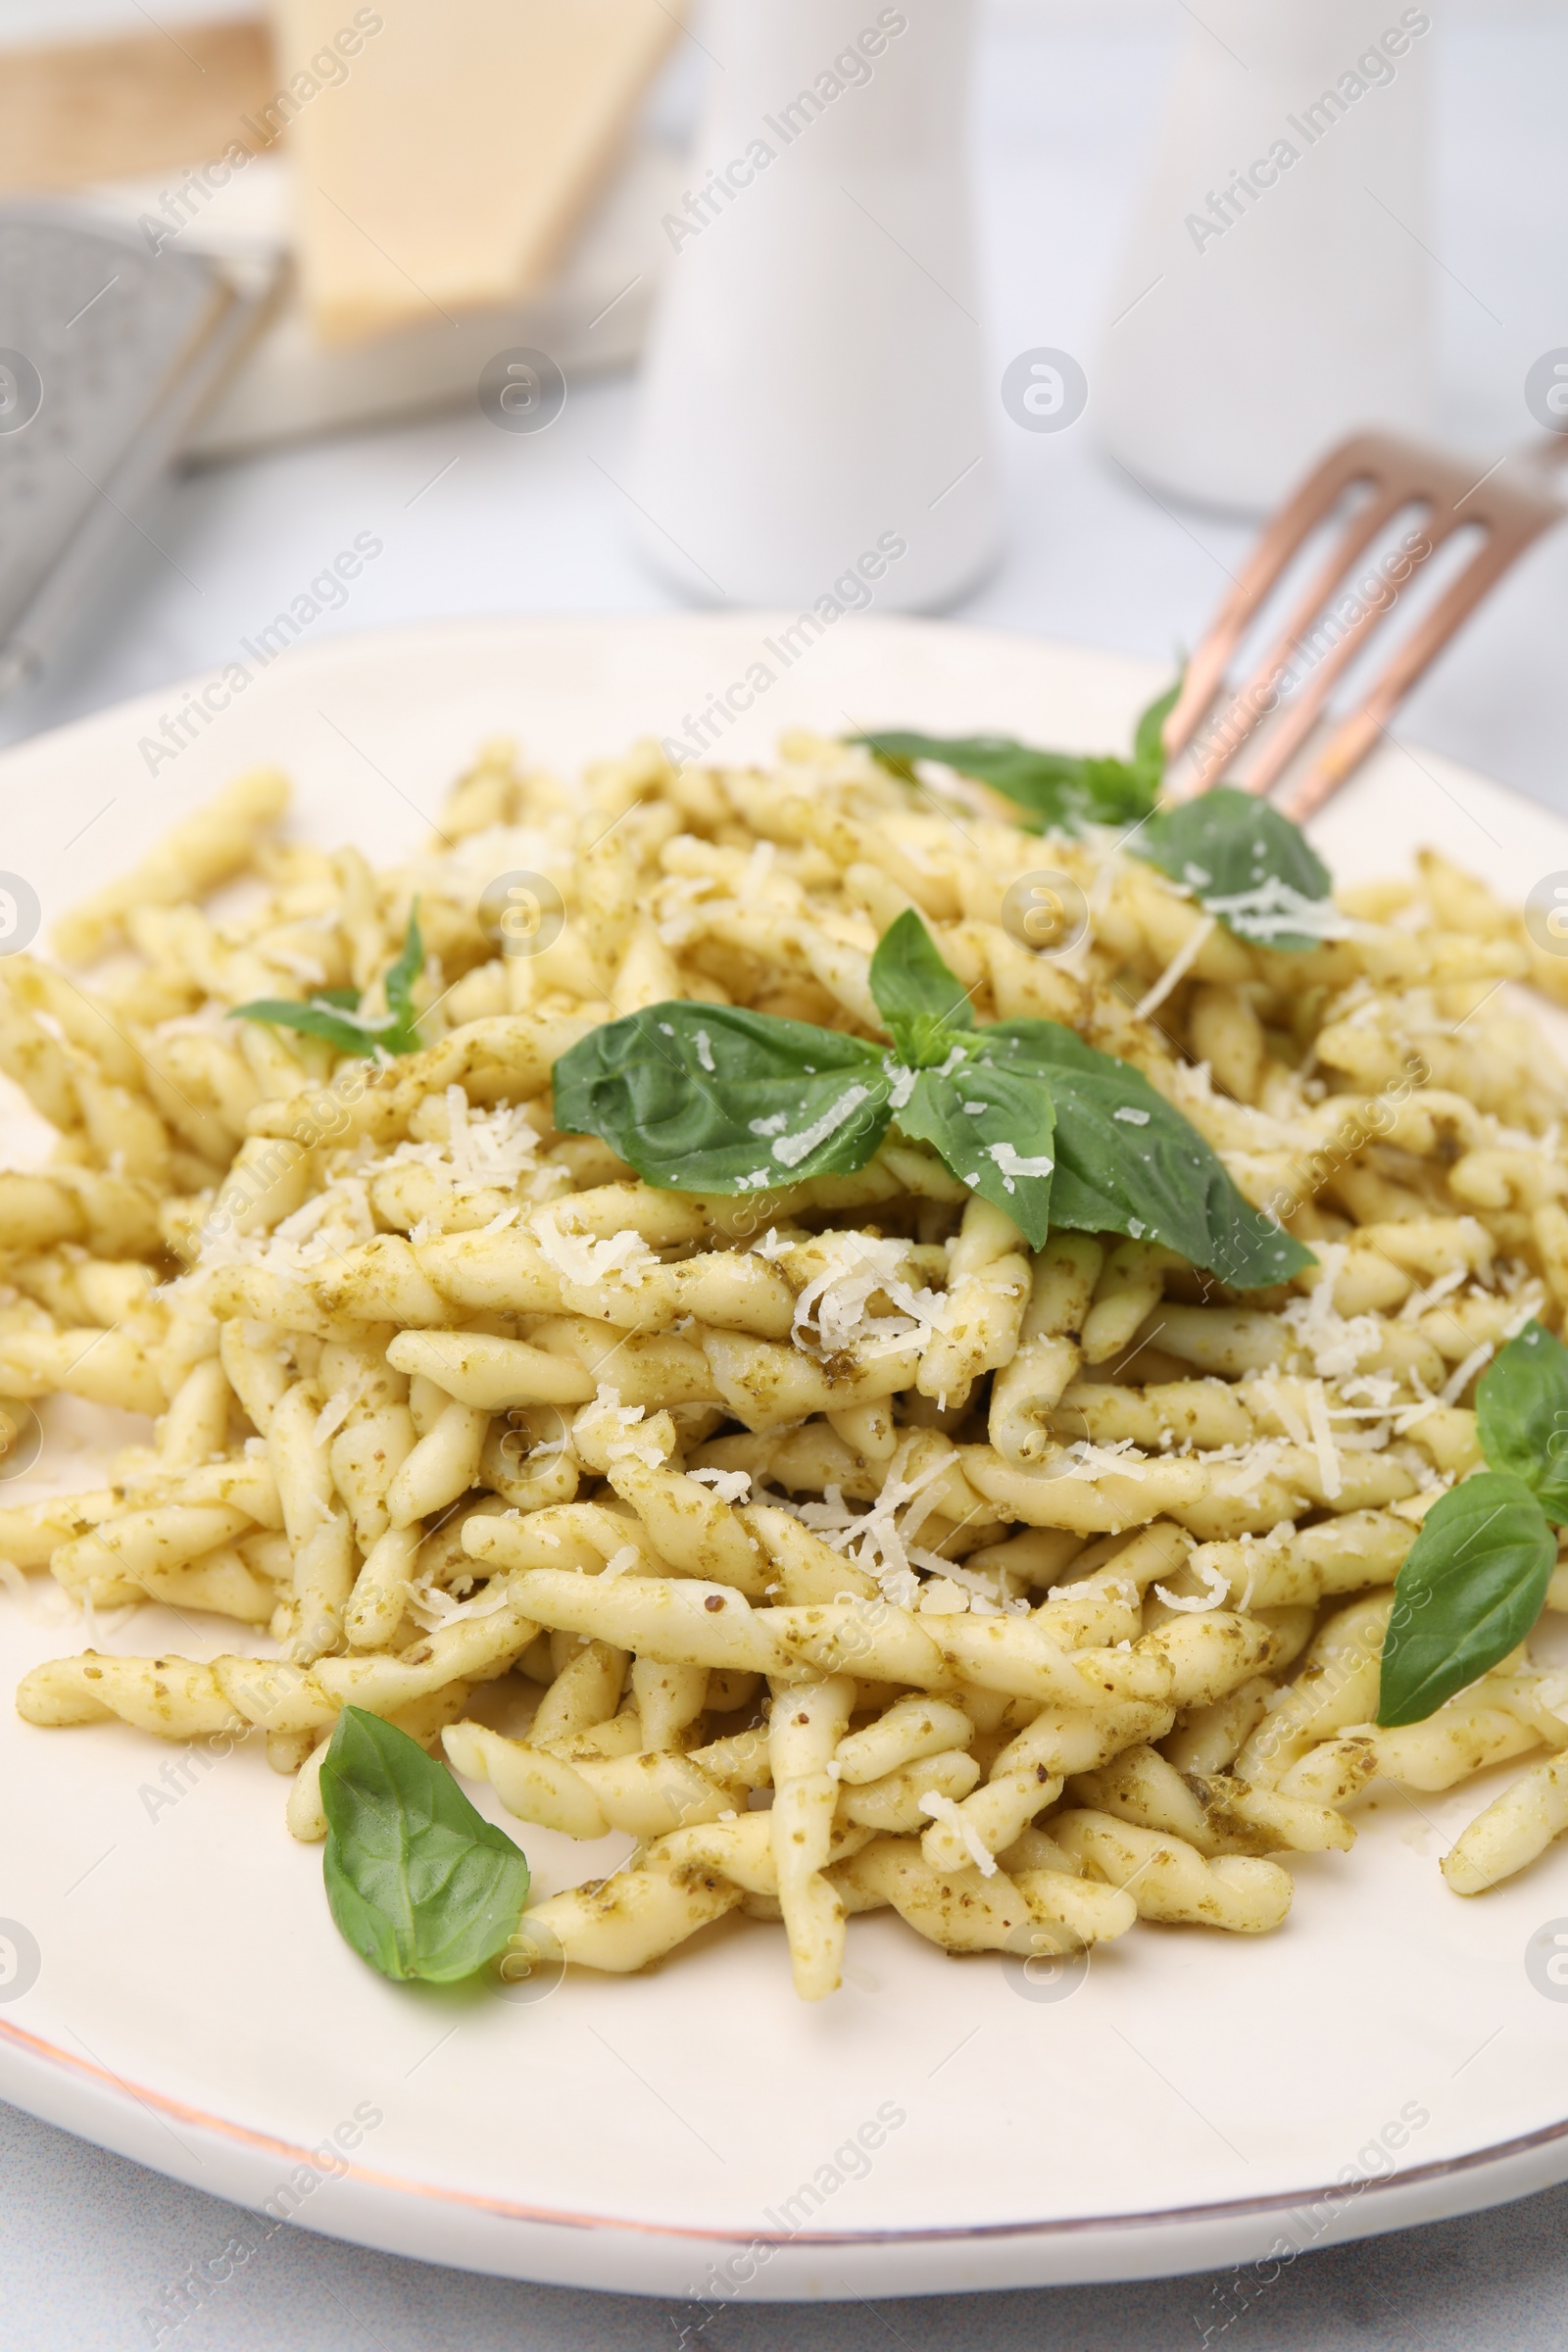 Photo of Plate of delicious trofie pasta with pesto sauce, cheese and basil leaves on table, closeup